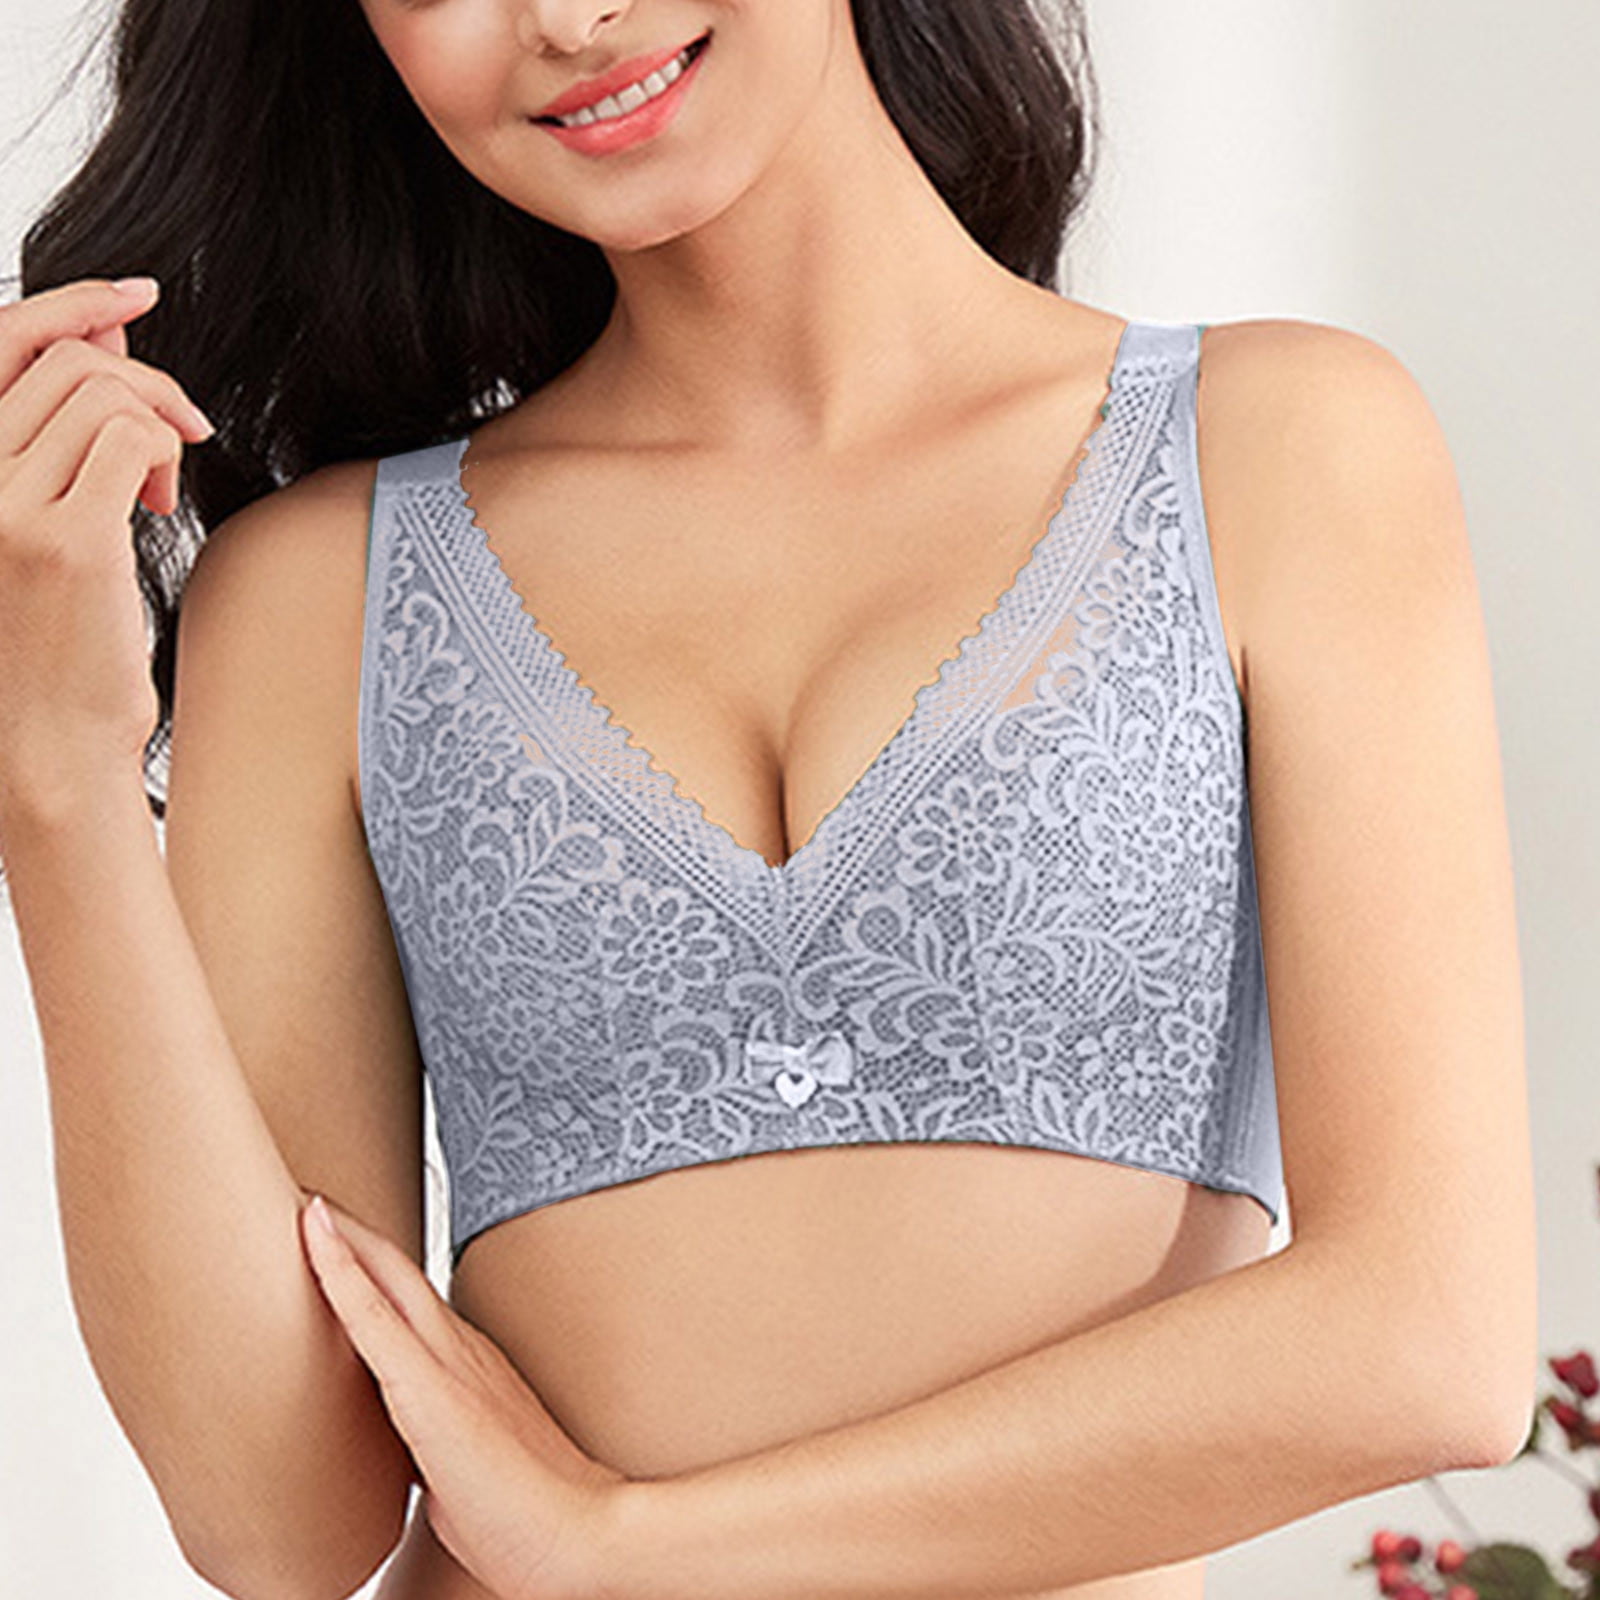 Floral Plus Size Lace Push Up Bra Full Coverage Underwire With Non Padded  Lace And Unlined Design For Women Beauwear Lingerie 40DD 50DDD From Uikta,  $22.63